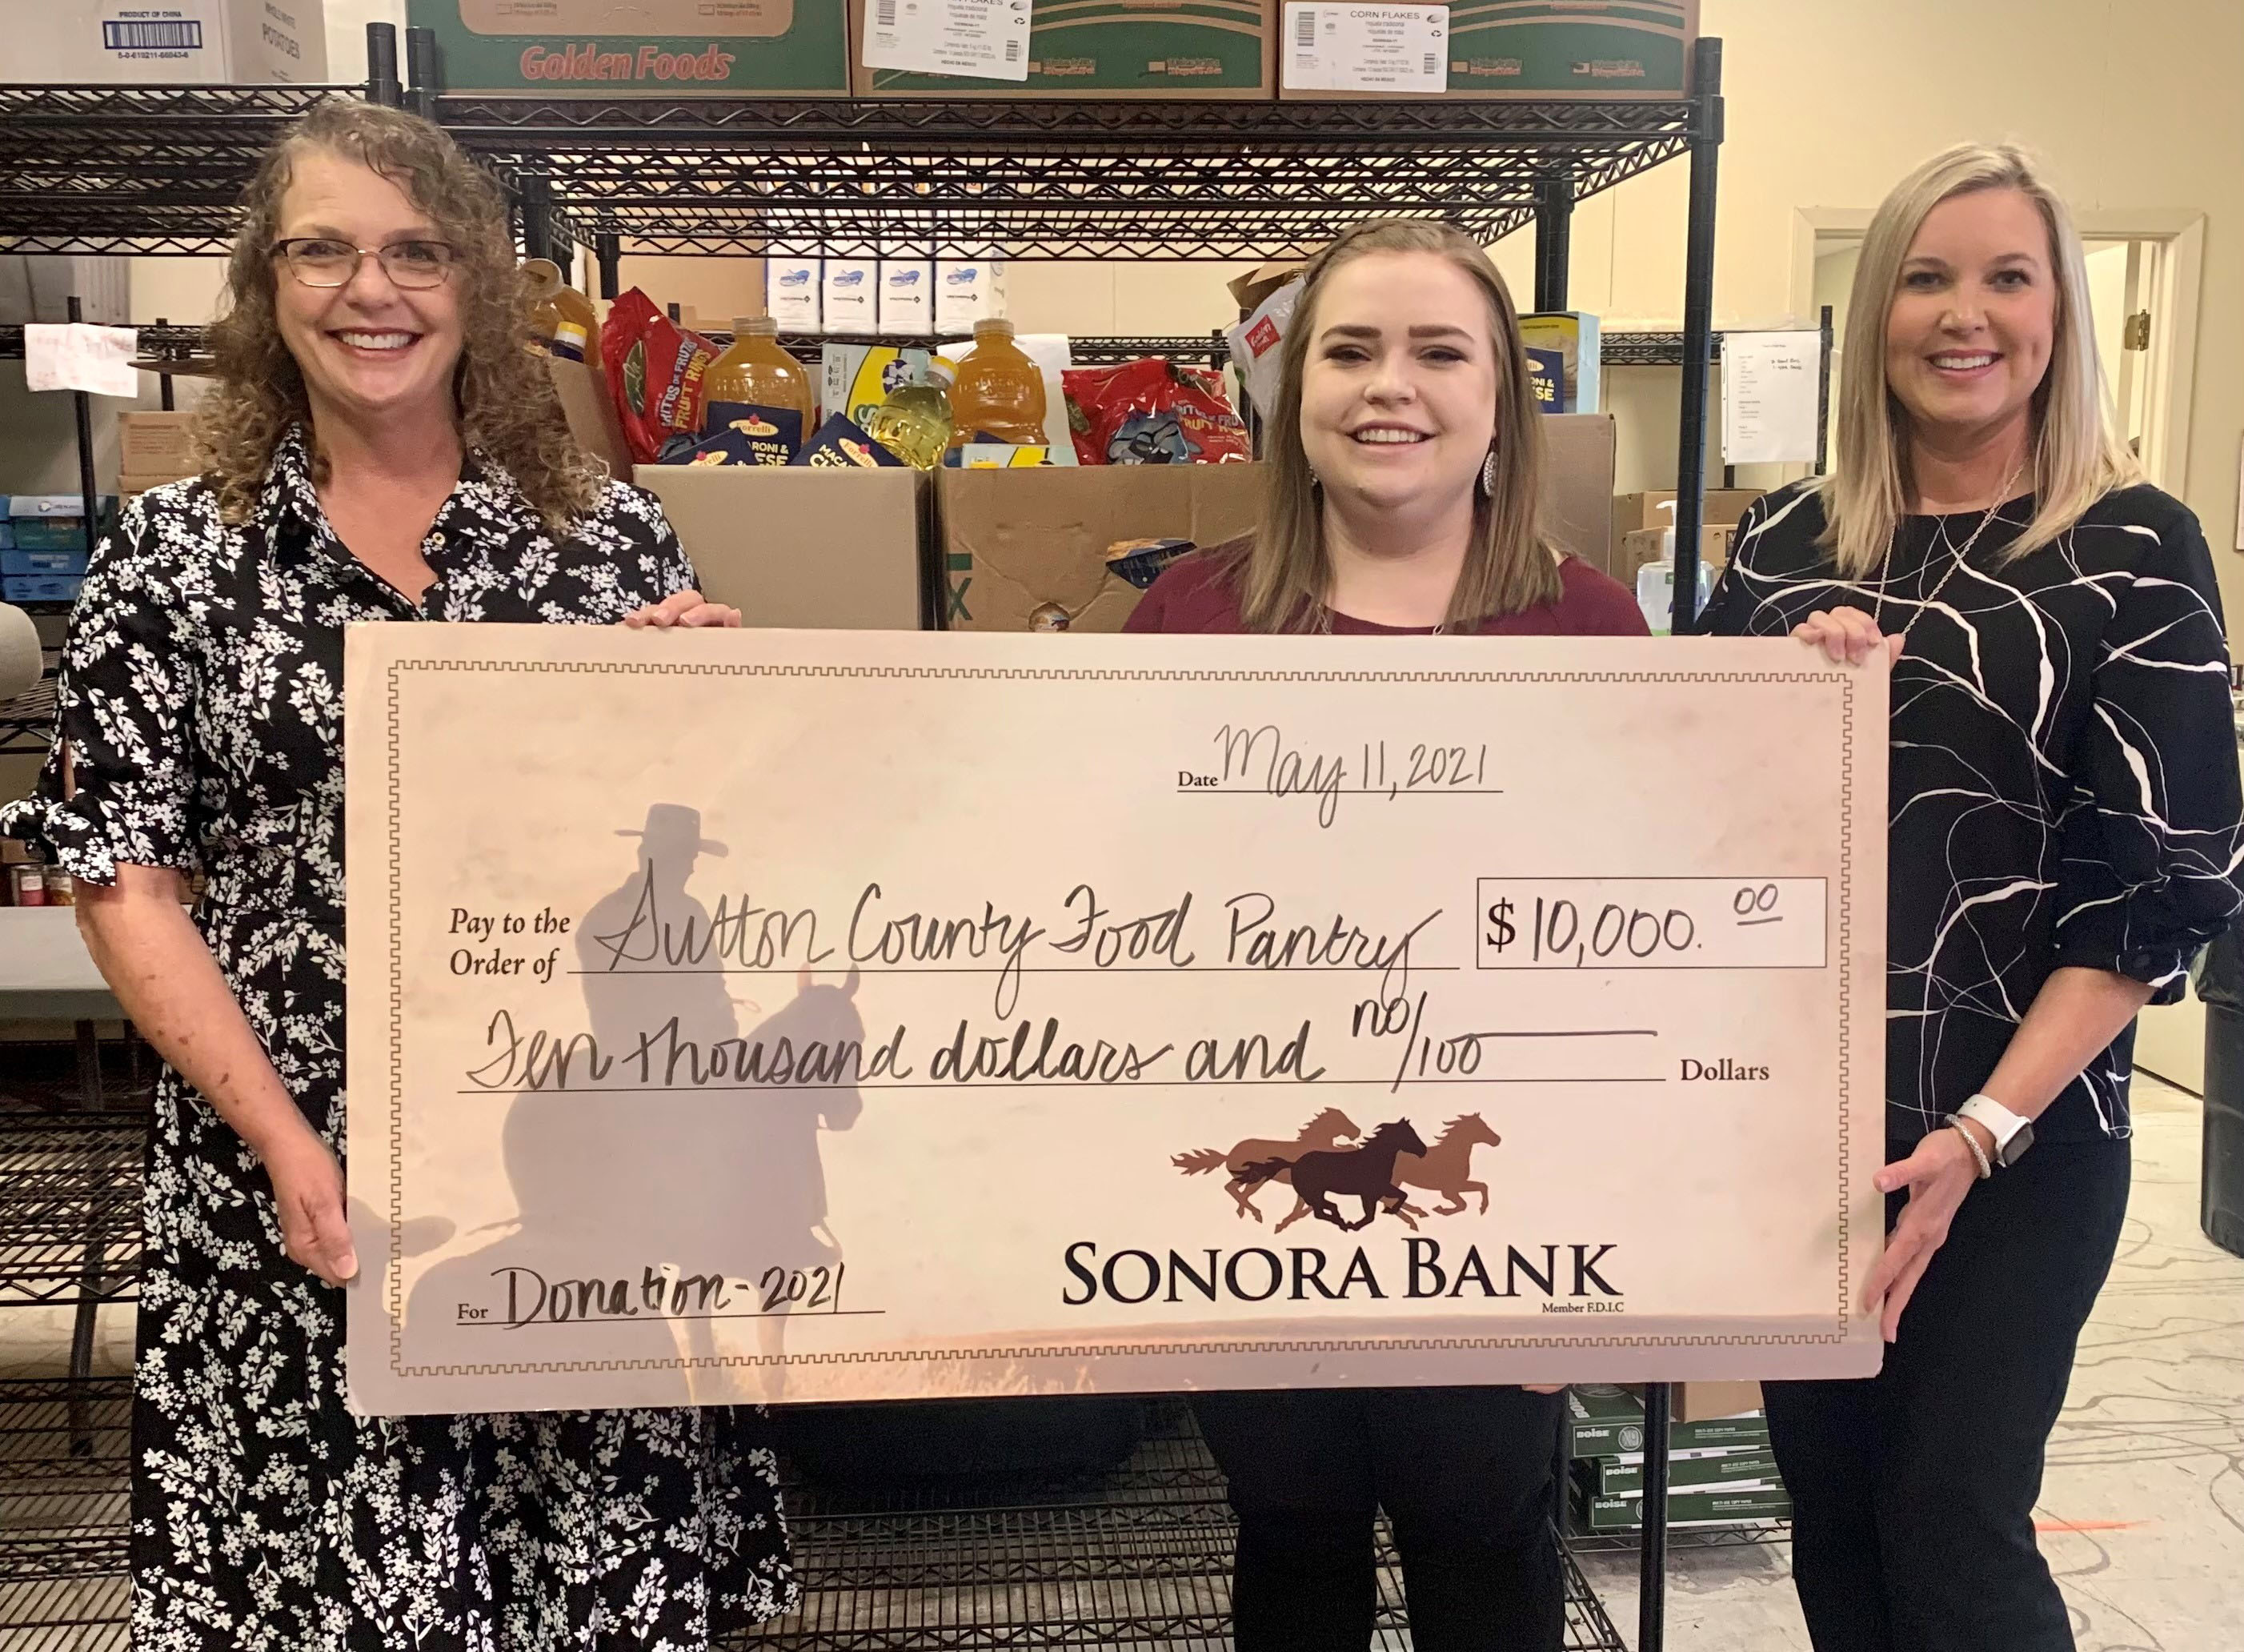 Sonora Bank team members present check to Sutton County Food Pantry